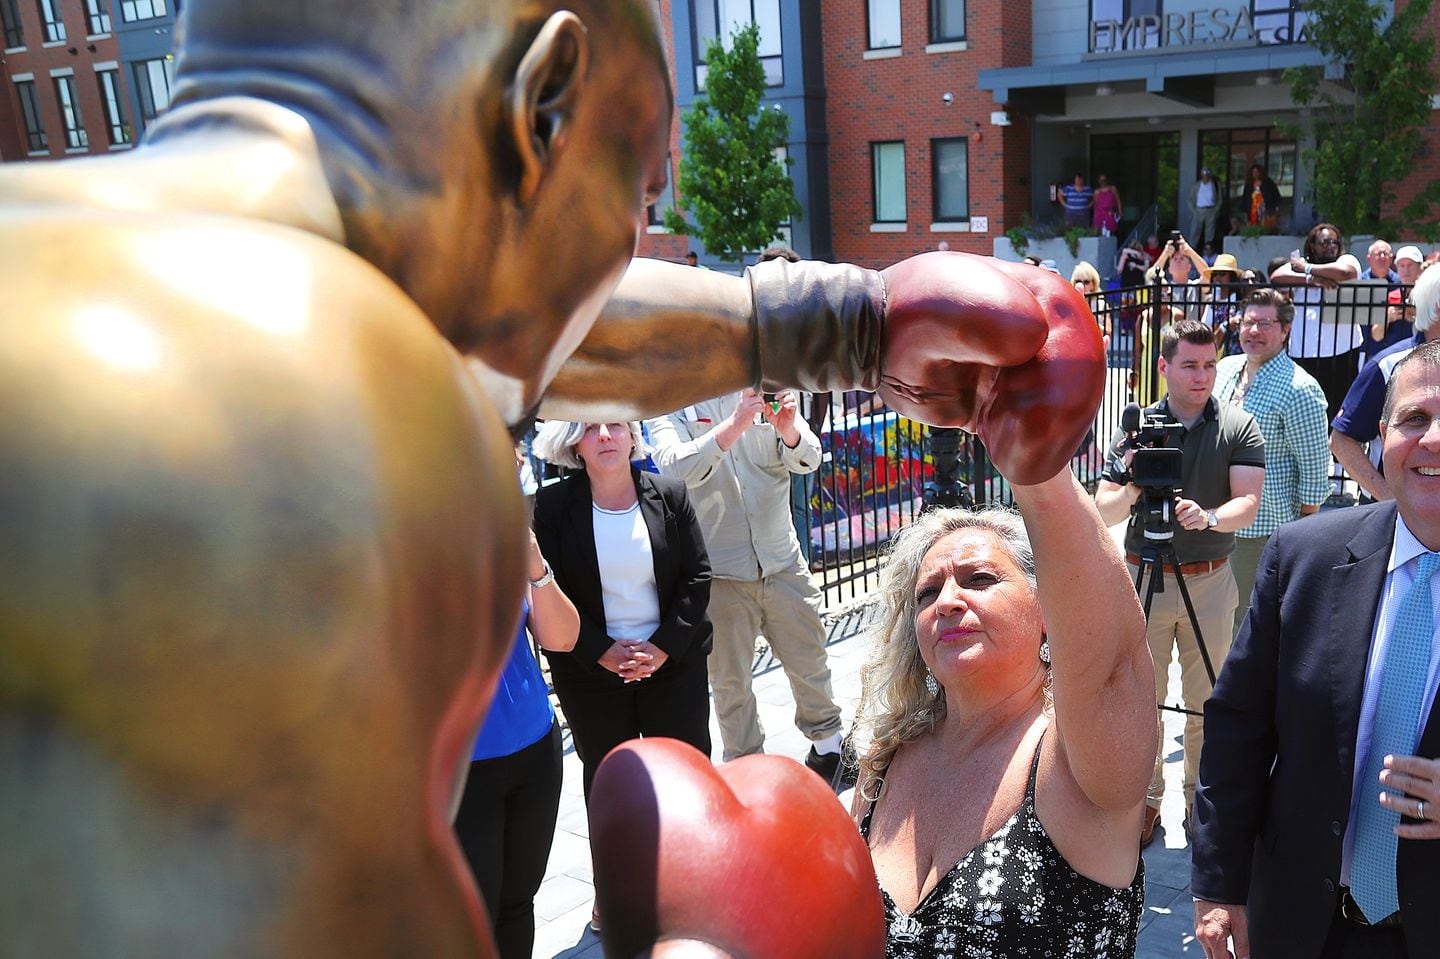 Kay Hagler, widow of Marvin Hagler, touched the glove of statue after unveiling Thursday morning in the heart of Brockton Center, a block from where he trained.